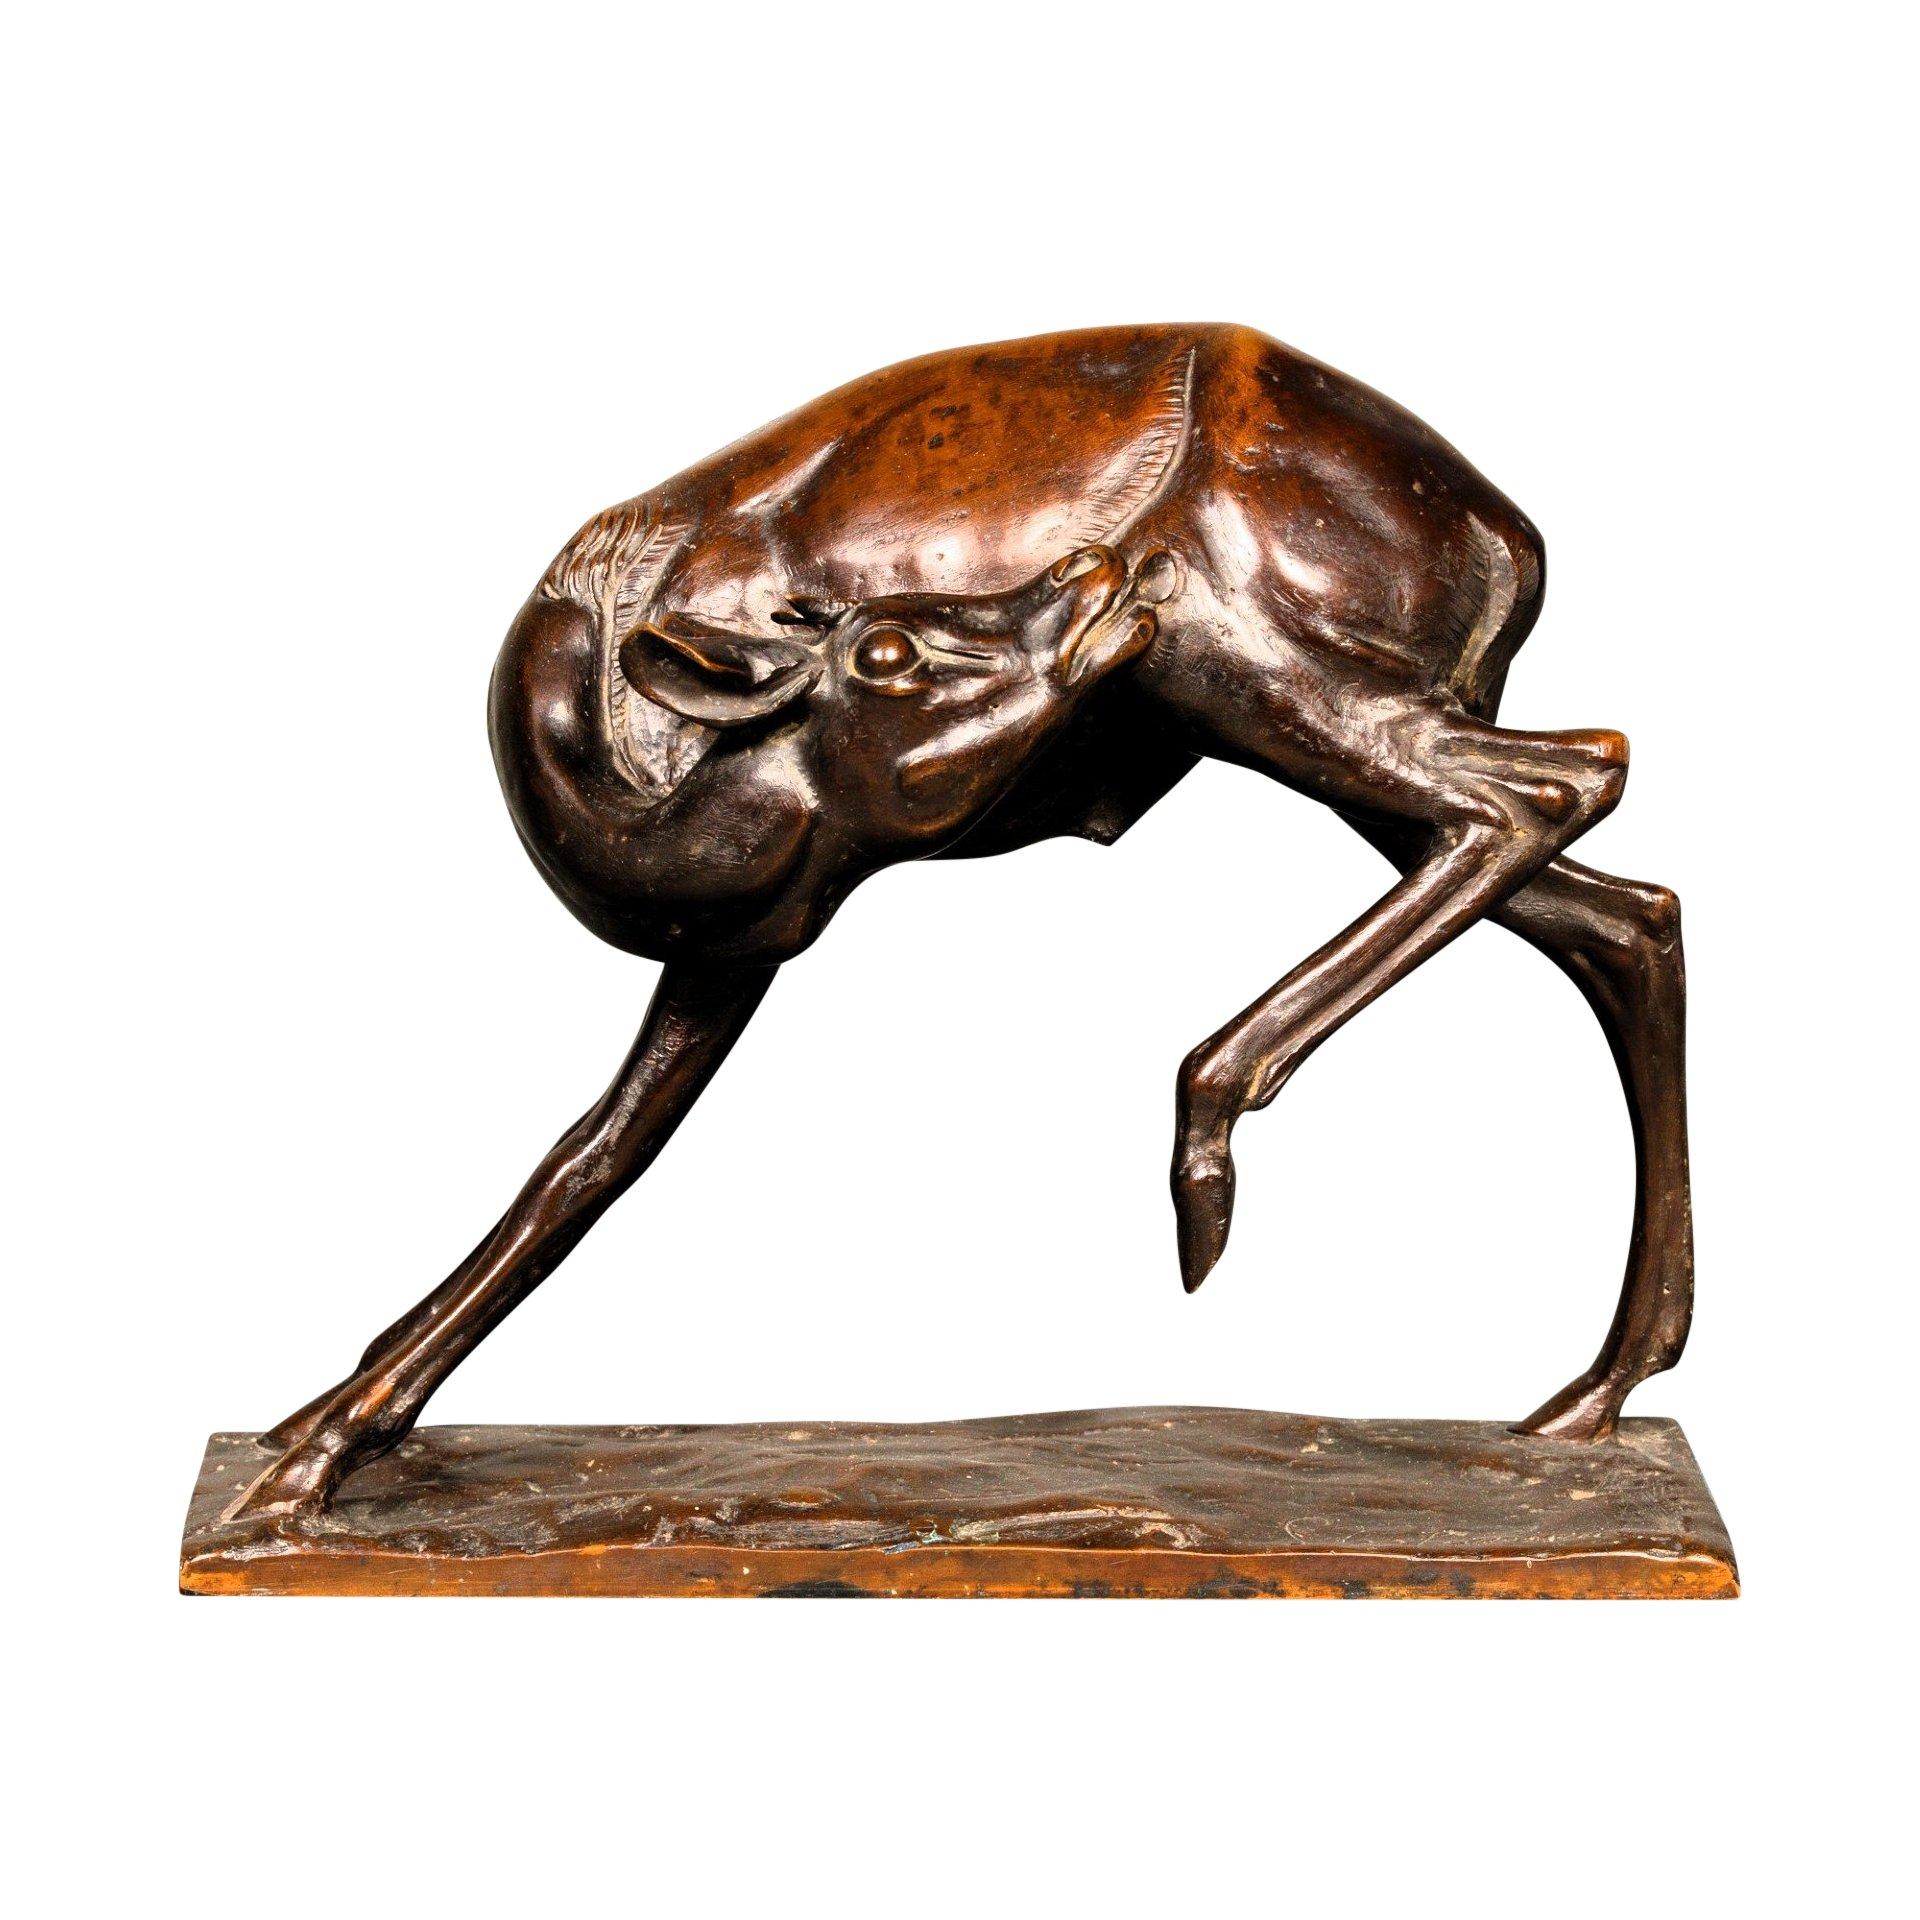 A fine bronze cast of a young antelope or male deer licking its back, by Sirio Tofanari (1886-1969). An old model with degraded dark-brown patina and lighter brown tones. Signed Sirio Tofanari on the base.

Title: Young Antelope
Dimensions: 20 cm